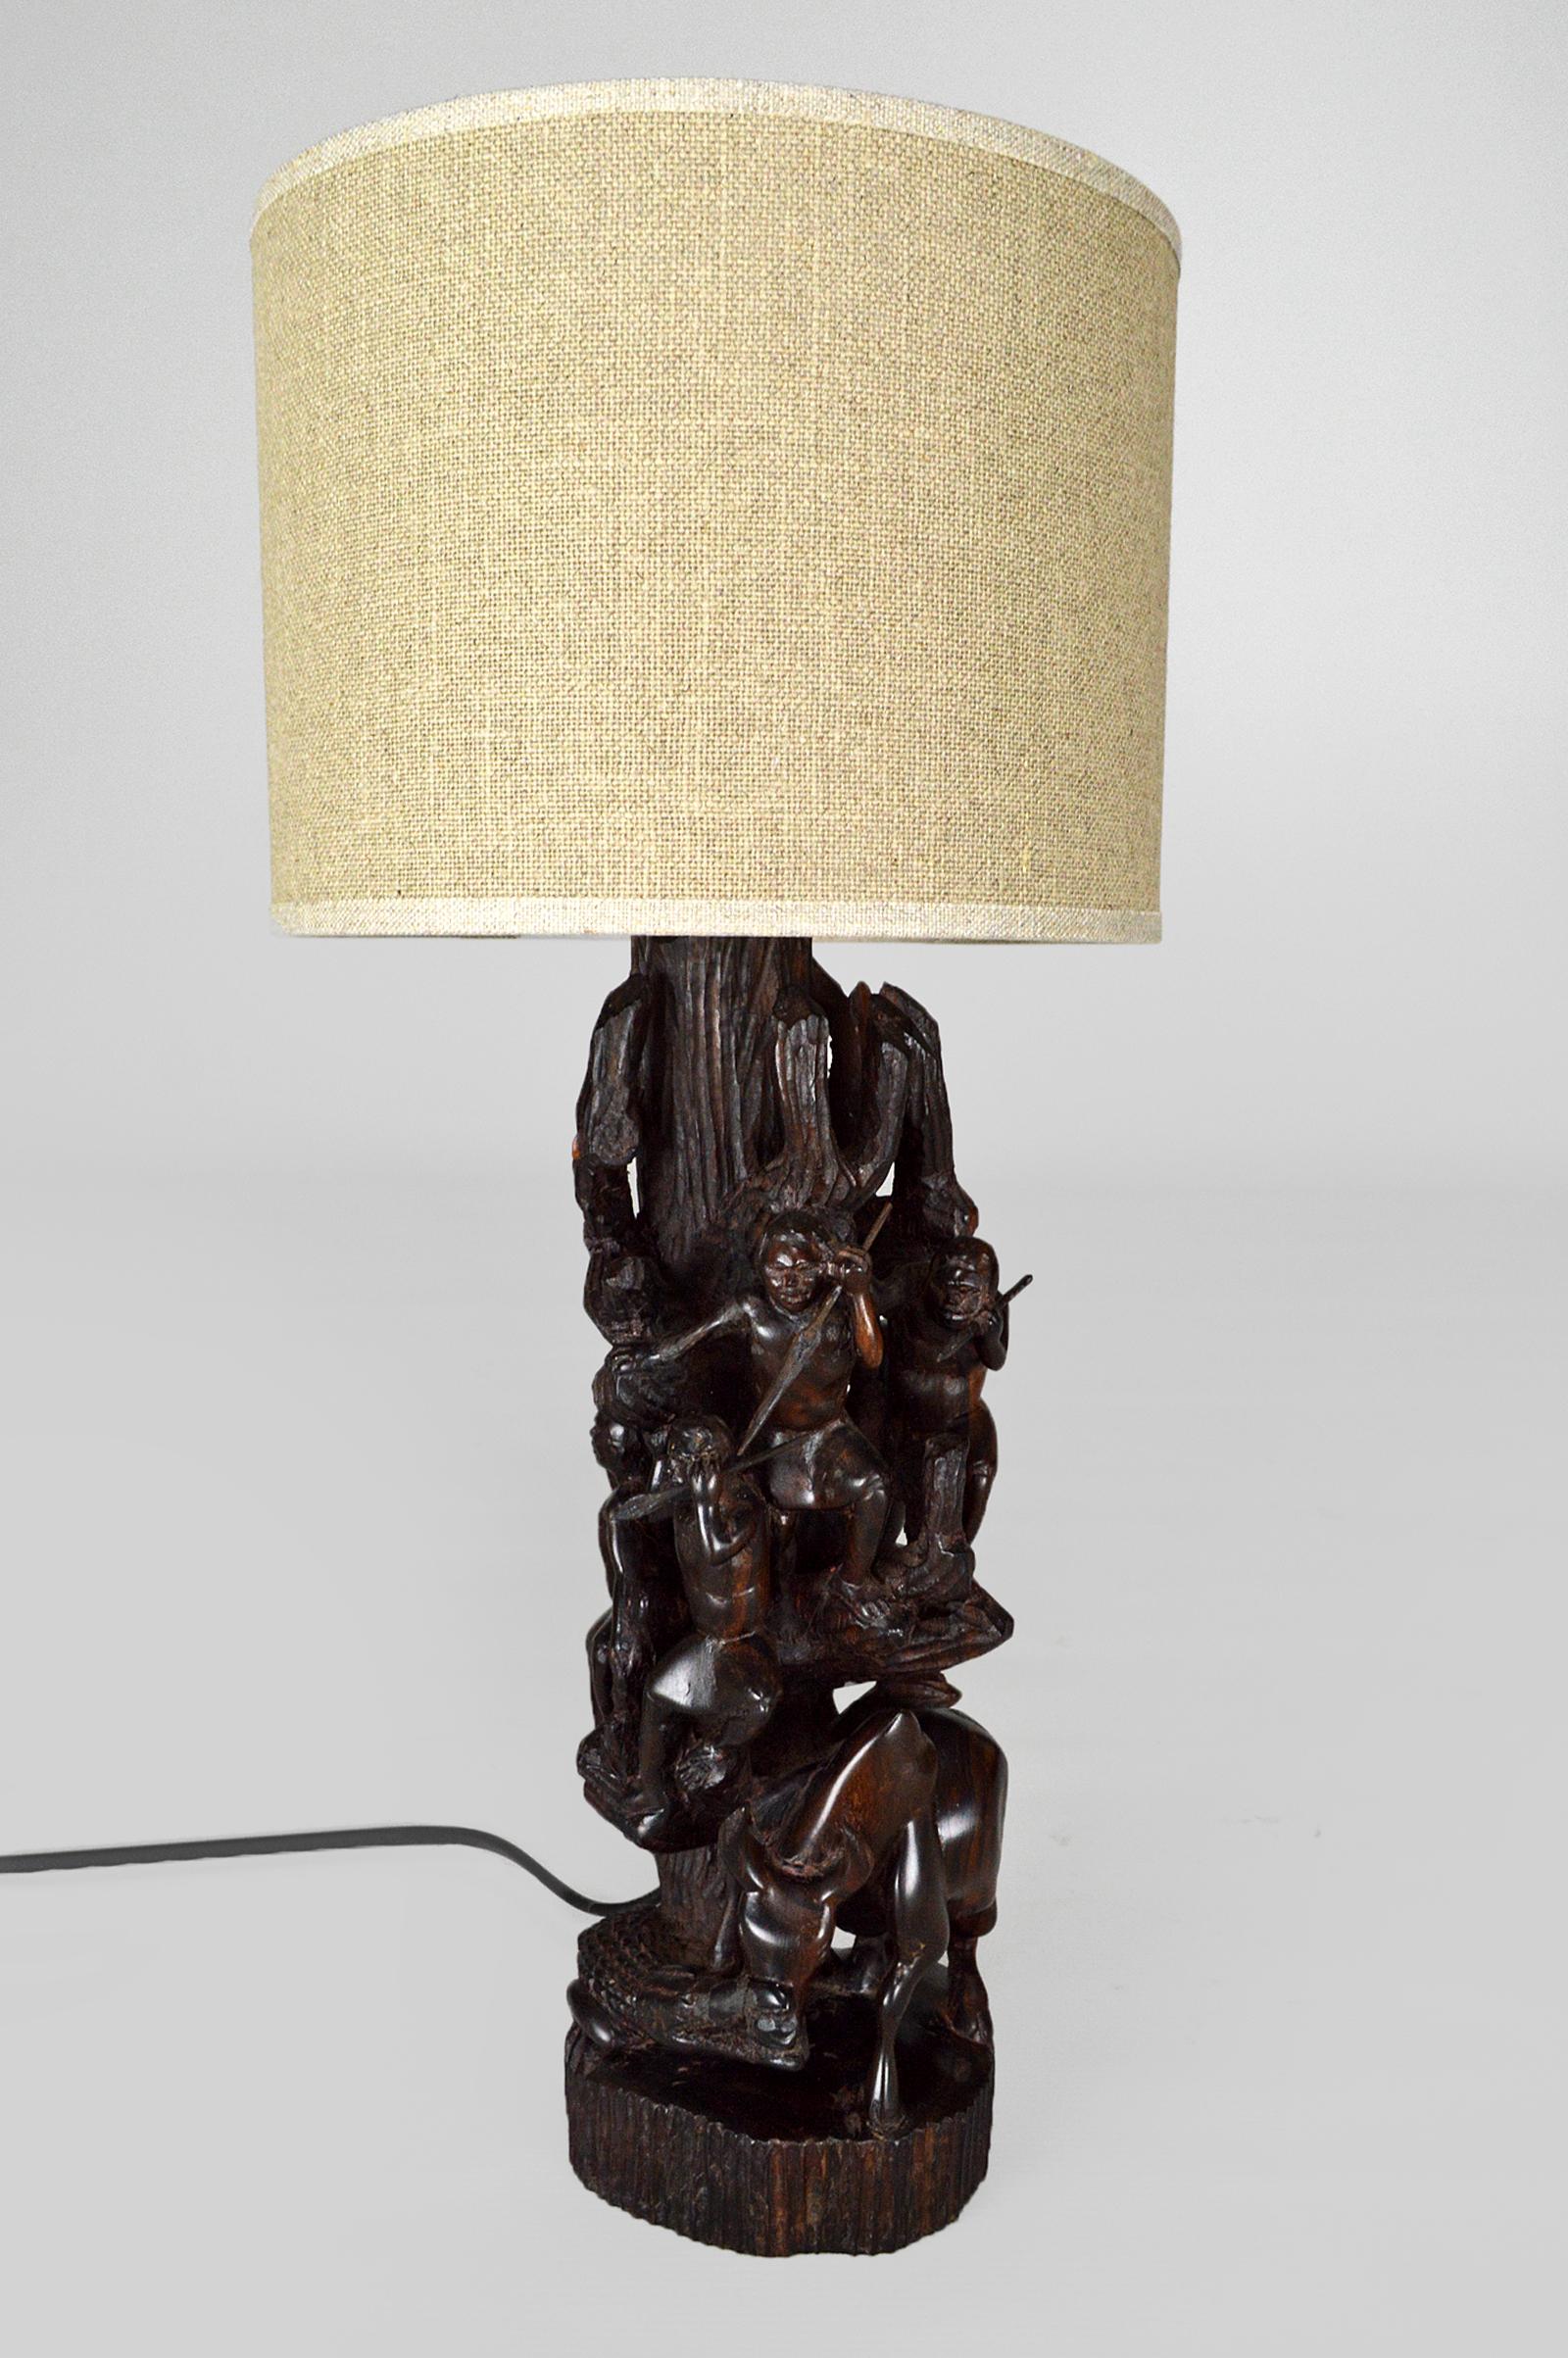 Rare African sculpture mounted as a table lamp.
Ebony base, linen lampshade.

Handmade sculpture in a single block of wood representing a group of 5 hunters/warriors with spears, taking refuge in a tree, above a buffalo attacked by a